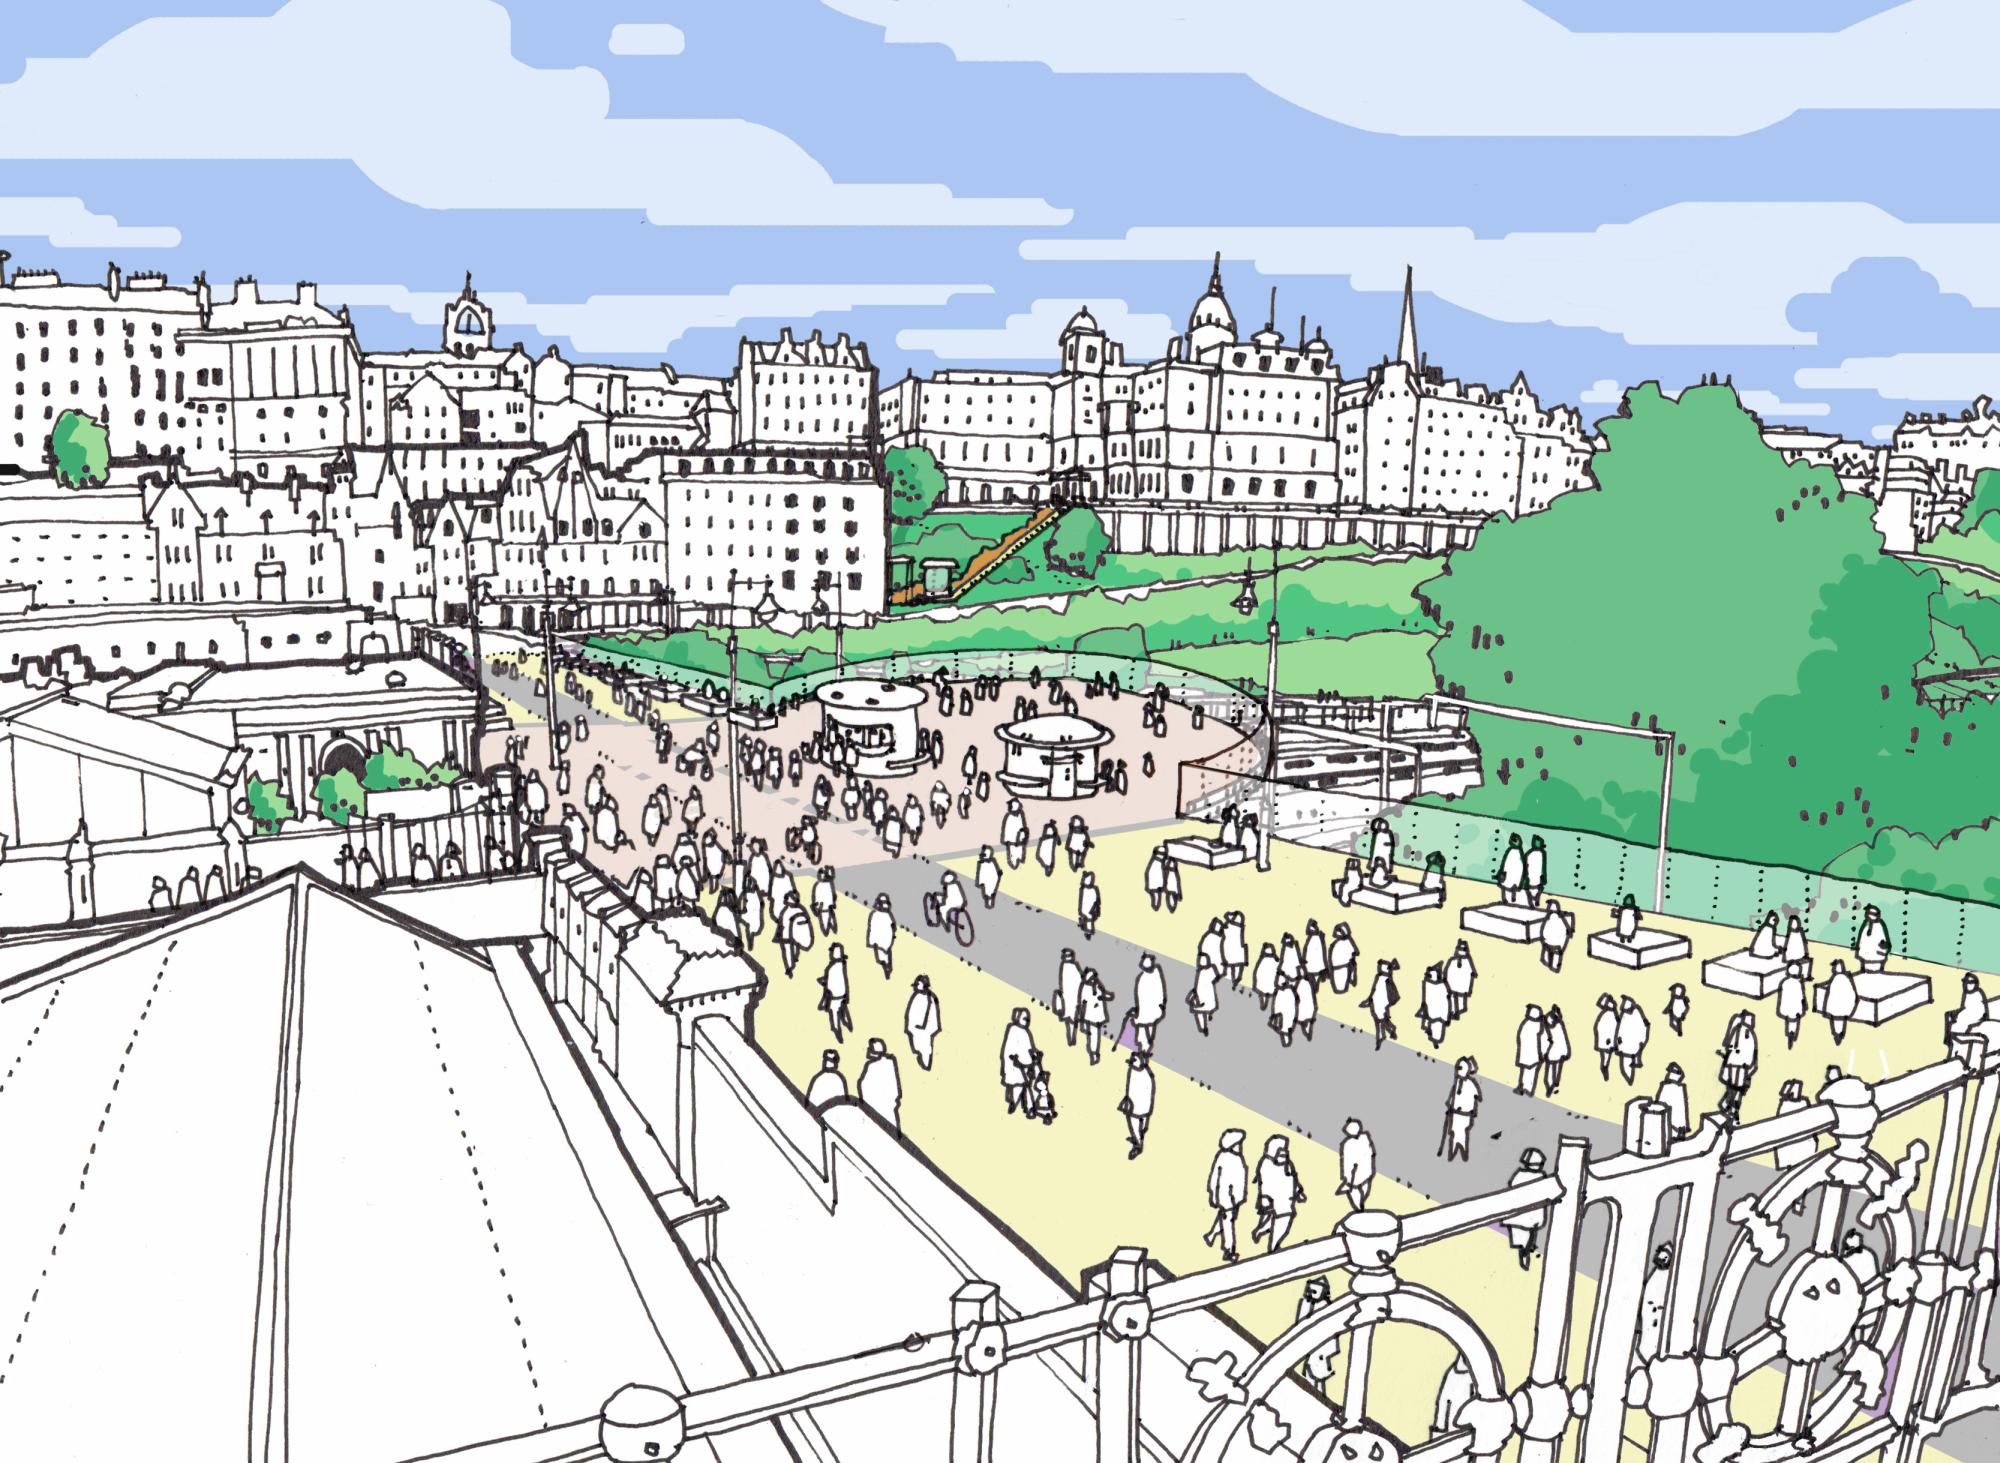 Edinburgh submits £314m city centre transformation masterplan for approval